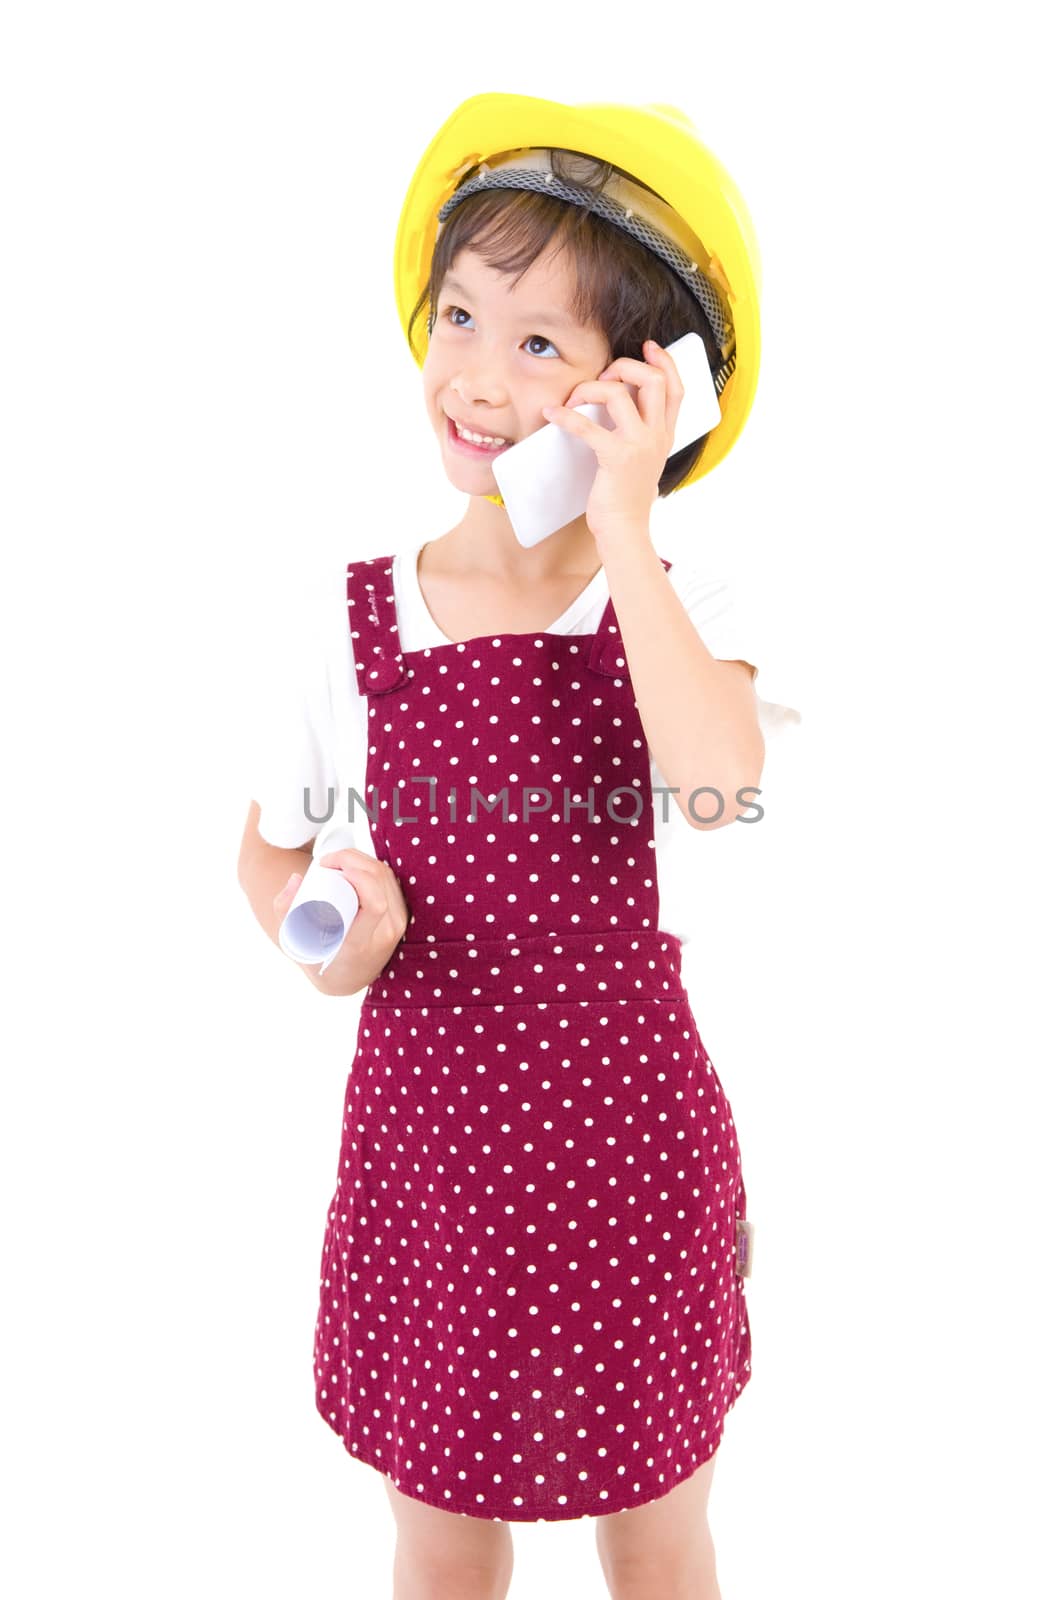 Little Engineer wearing the construction helmet,talking with smartphone and  olding a contruction drawing, isolated over white background.